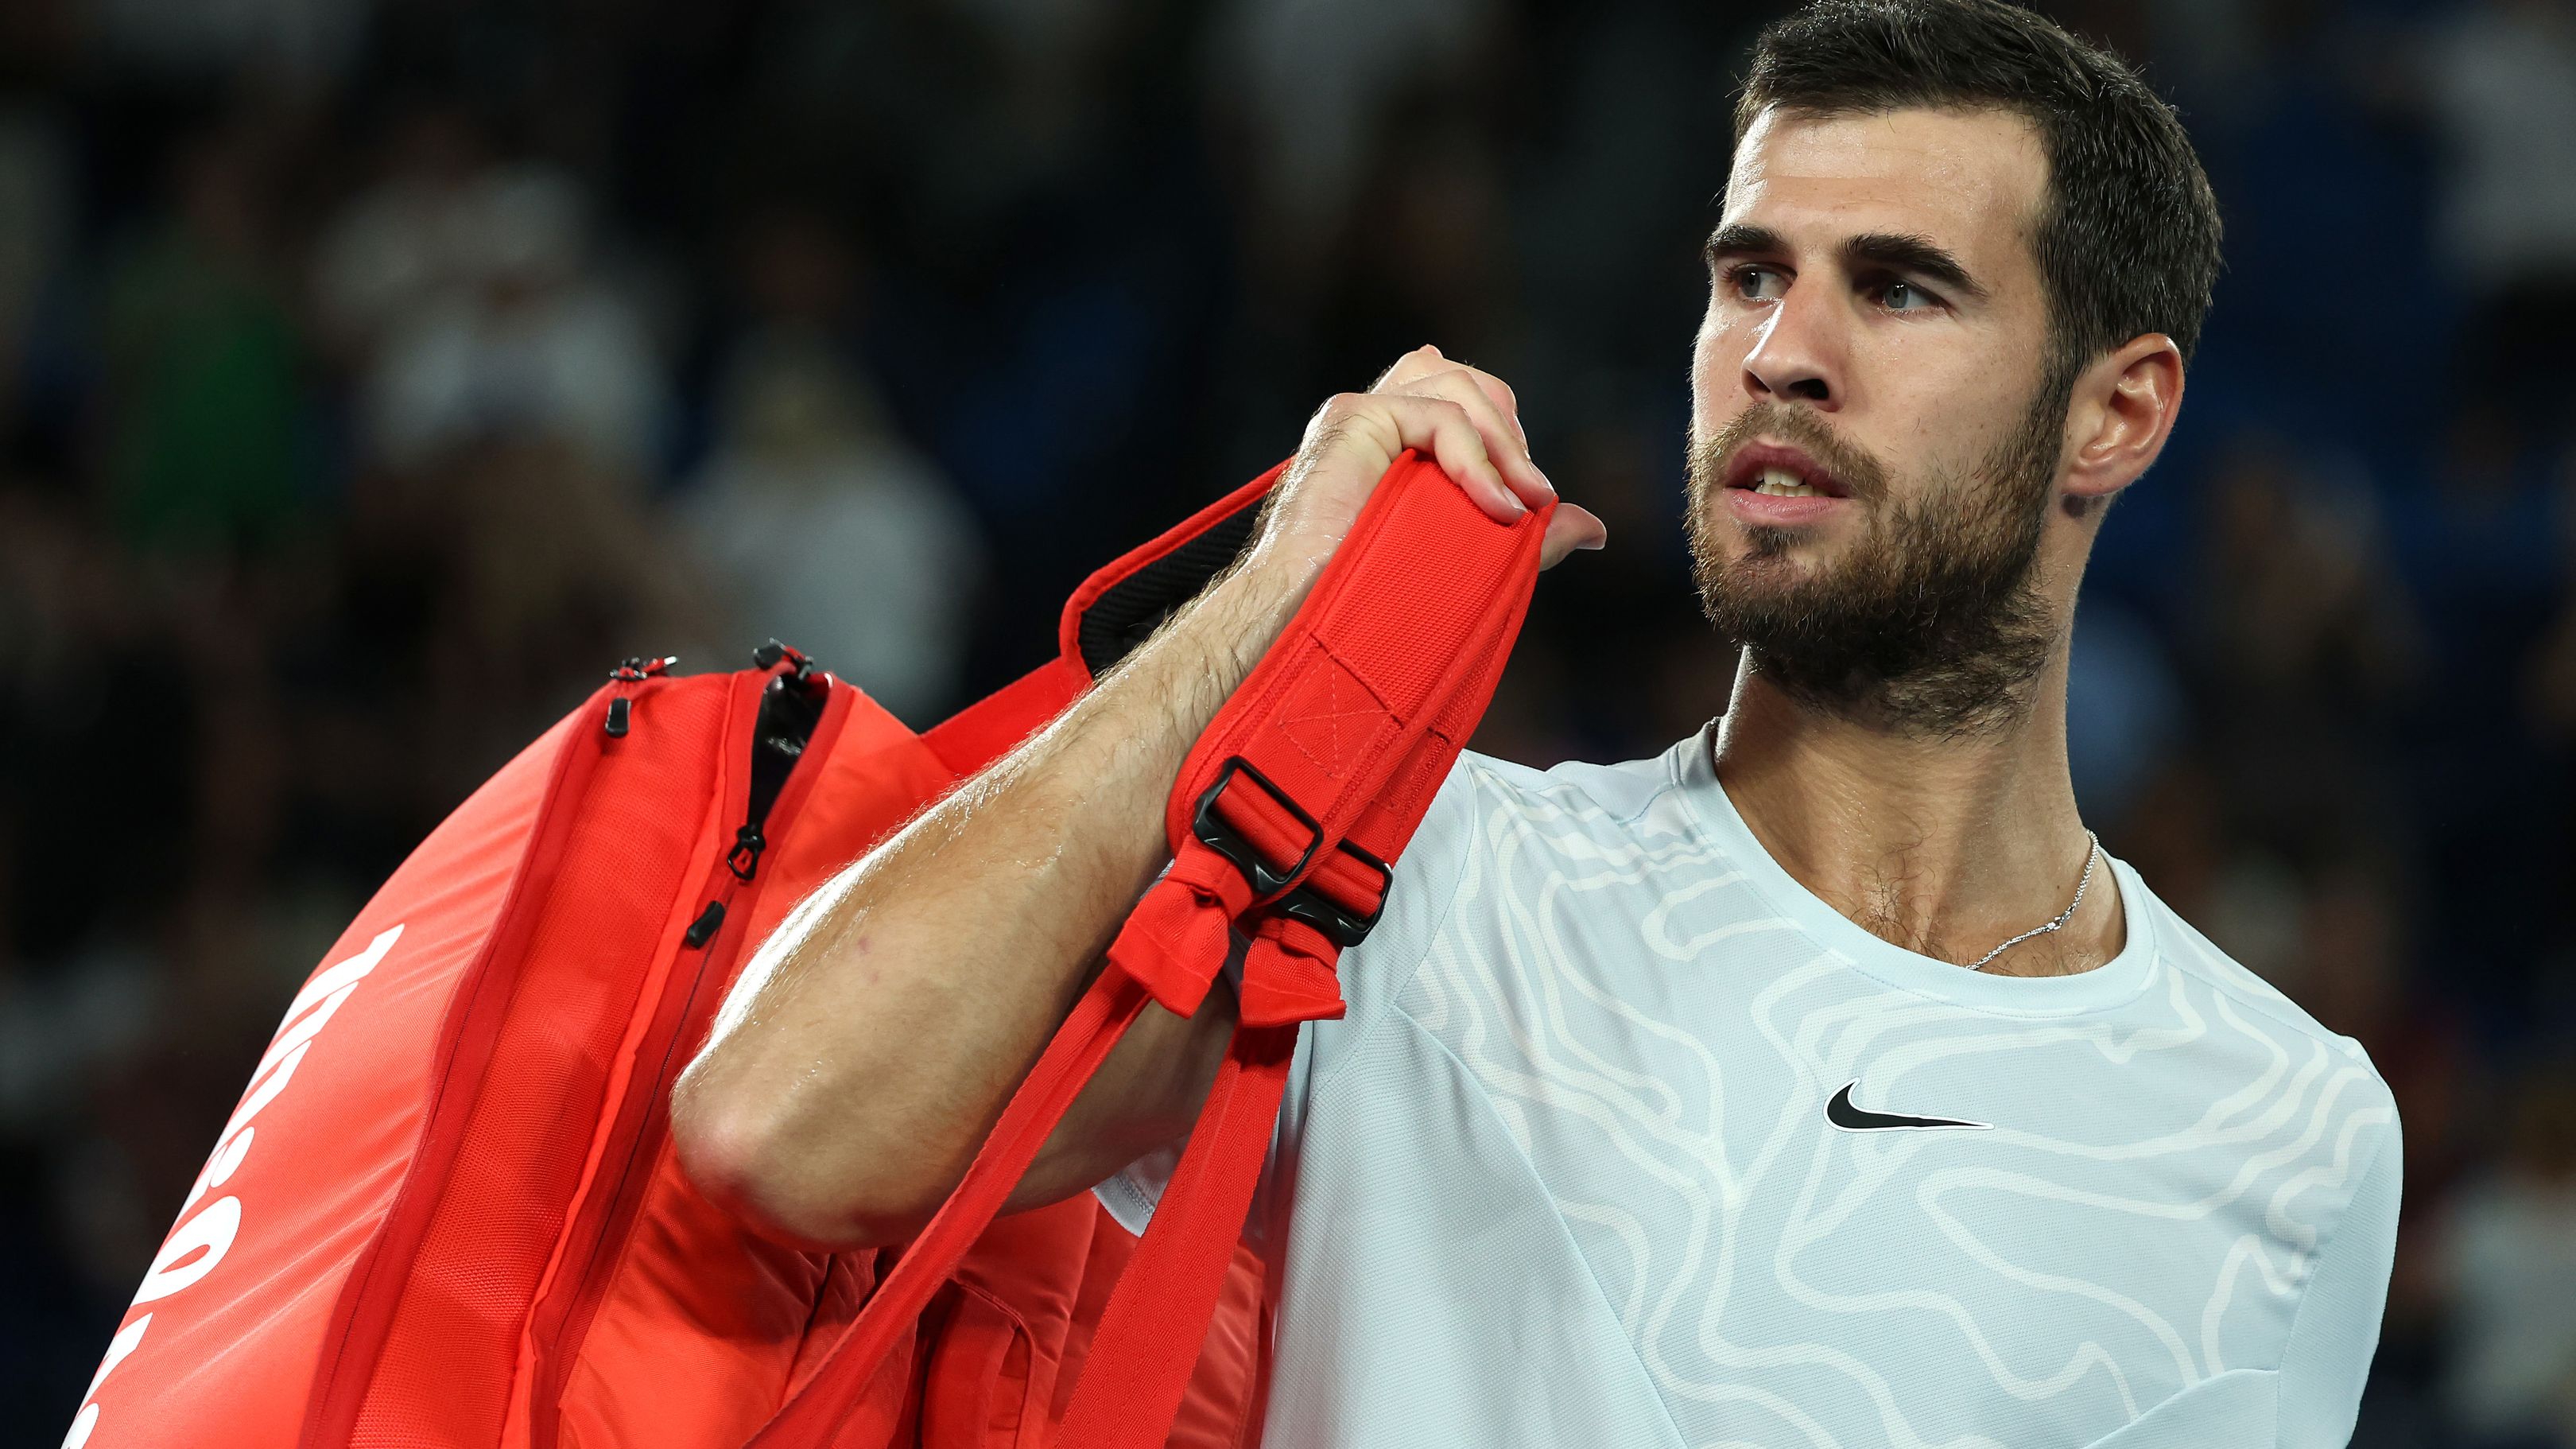 Karen Khachanov of Russia after beating Sebastian Korda of the United States at the 2023 Australian Open. (Photo by Mark Kolbe/Getty Images)